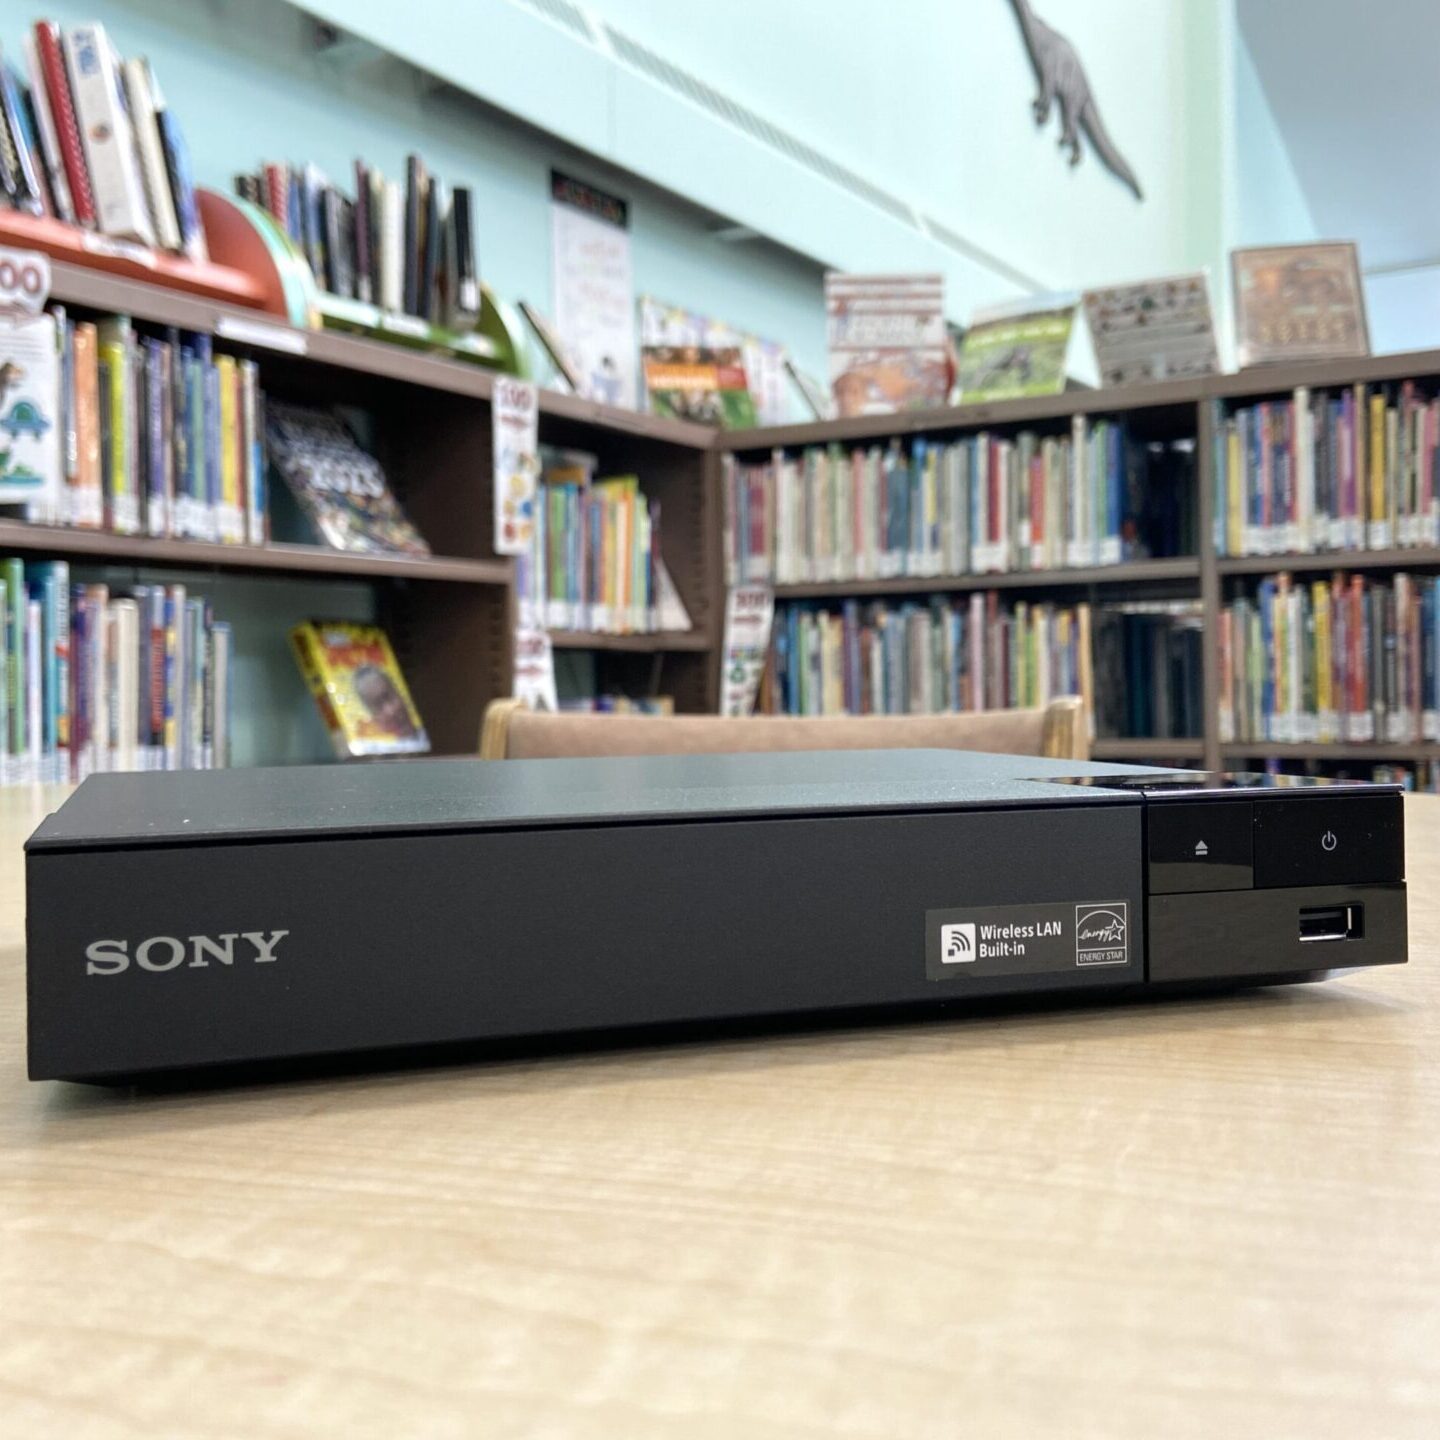 Sony Blu-Ray Player in library